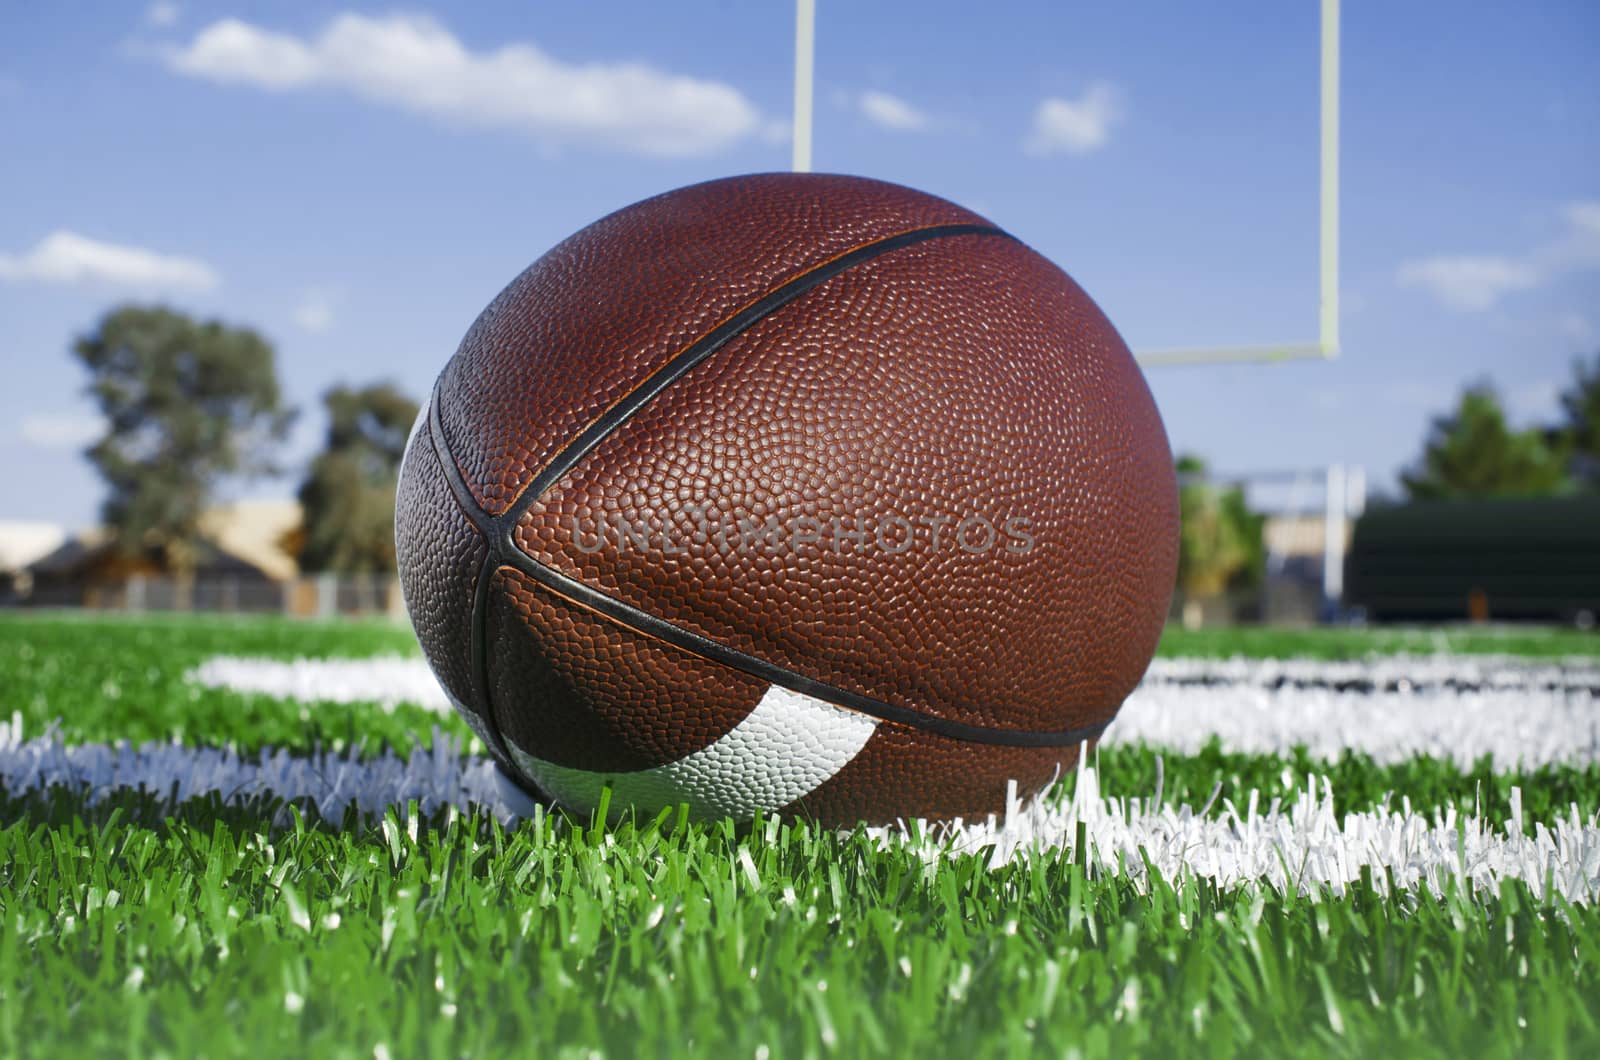 American football on find with goal posts by Paulmatthewphoto